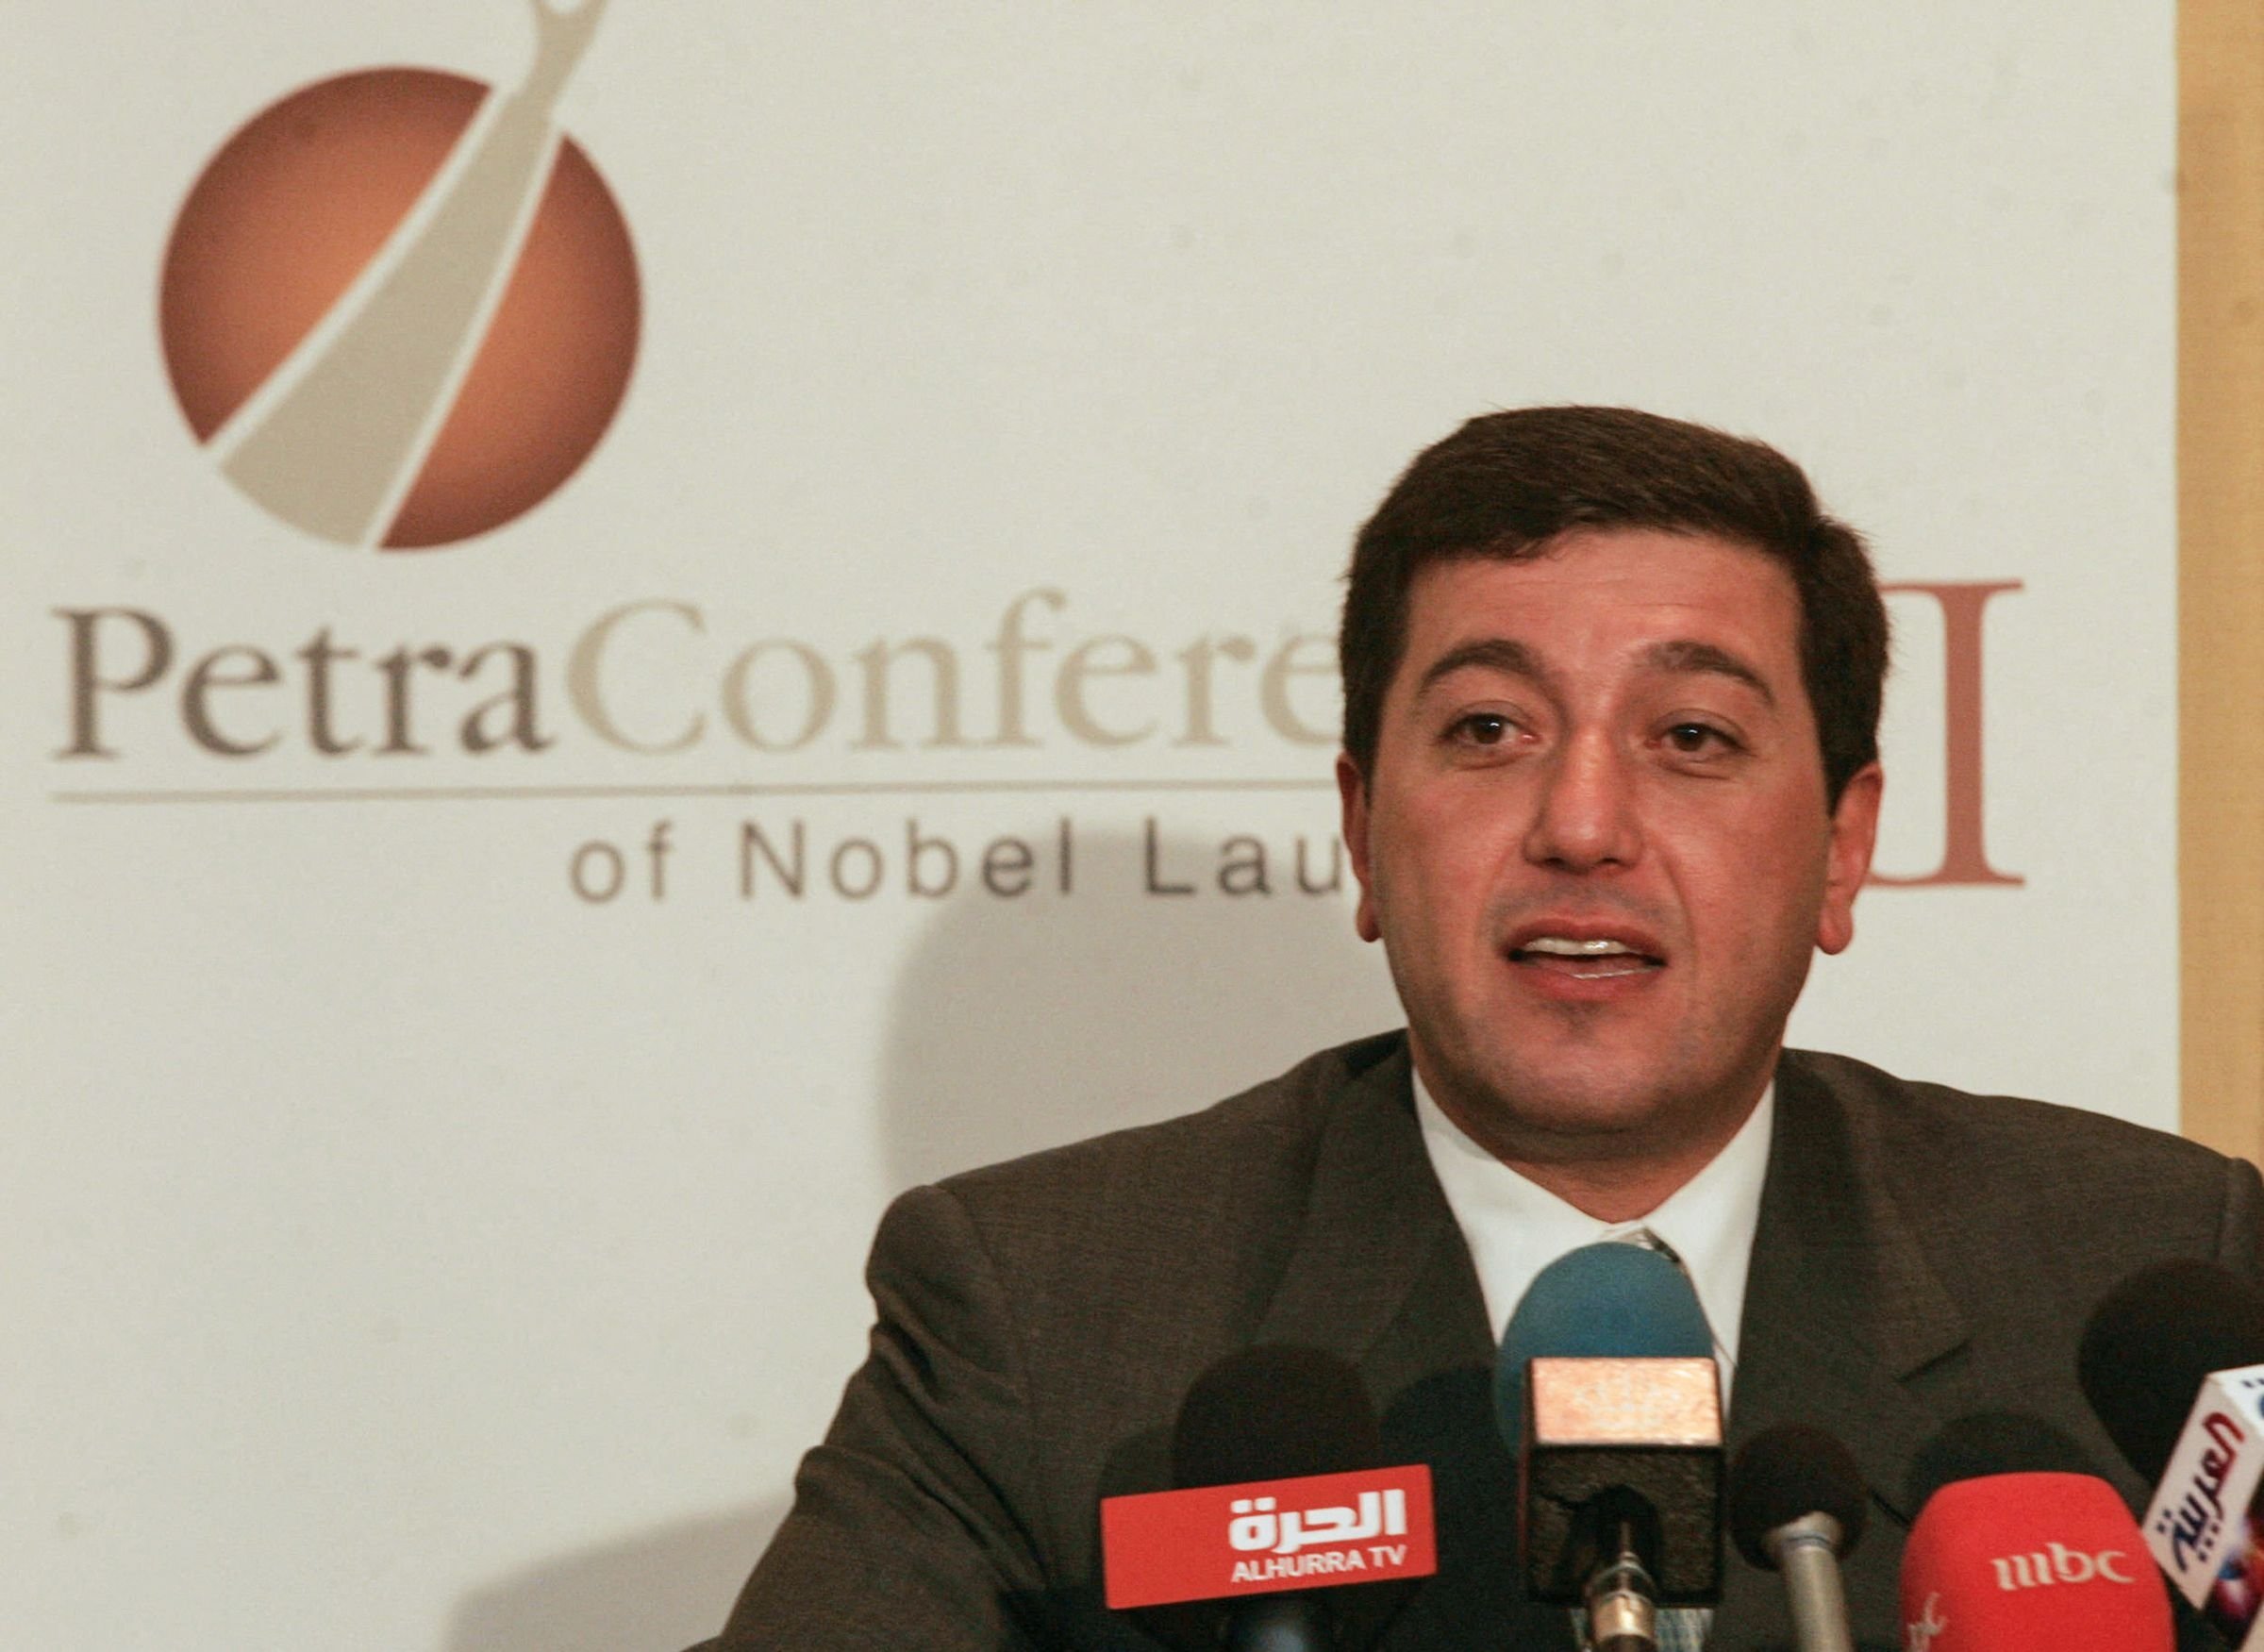 In this file photo taken on June 20, 2006 Jordanian Bassem Awadallah, vice-president of the King Abdullah II Fund for Development (KAFD), speaks to media a day before the opening of the two-day Second Petra Conference of Nobel Laureates hosted by Jordan's King Abdullah II and Nobel Peace winner Elie Wiesel, founder of the Elie Wiesel Foundation for Humanity, in the ancient city of Petra, about 80 kilometers south of the Dead Sea. (AFP Photo)